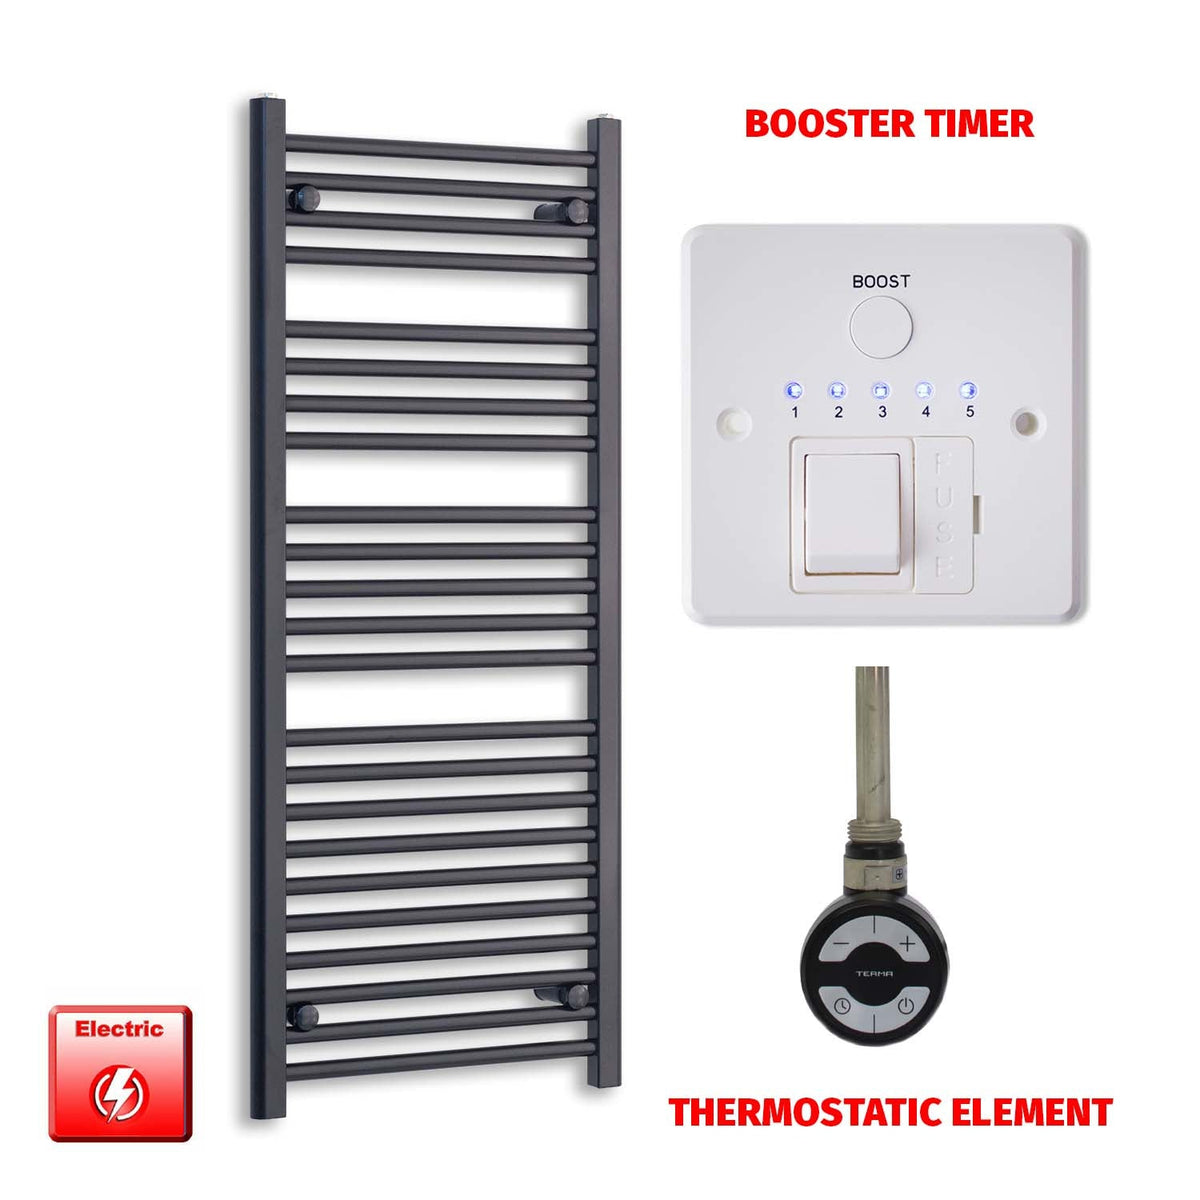 1200 x 550mm Wide Flat Black Pre-Filled Electric Heated Towel Radiator HTR MOA Thermostatic Booster